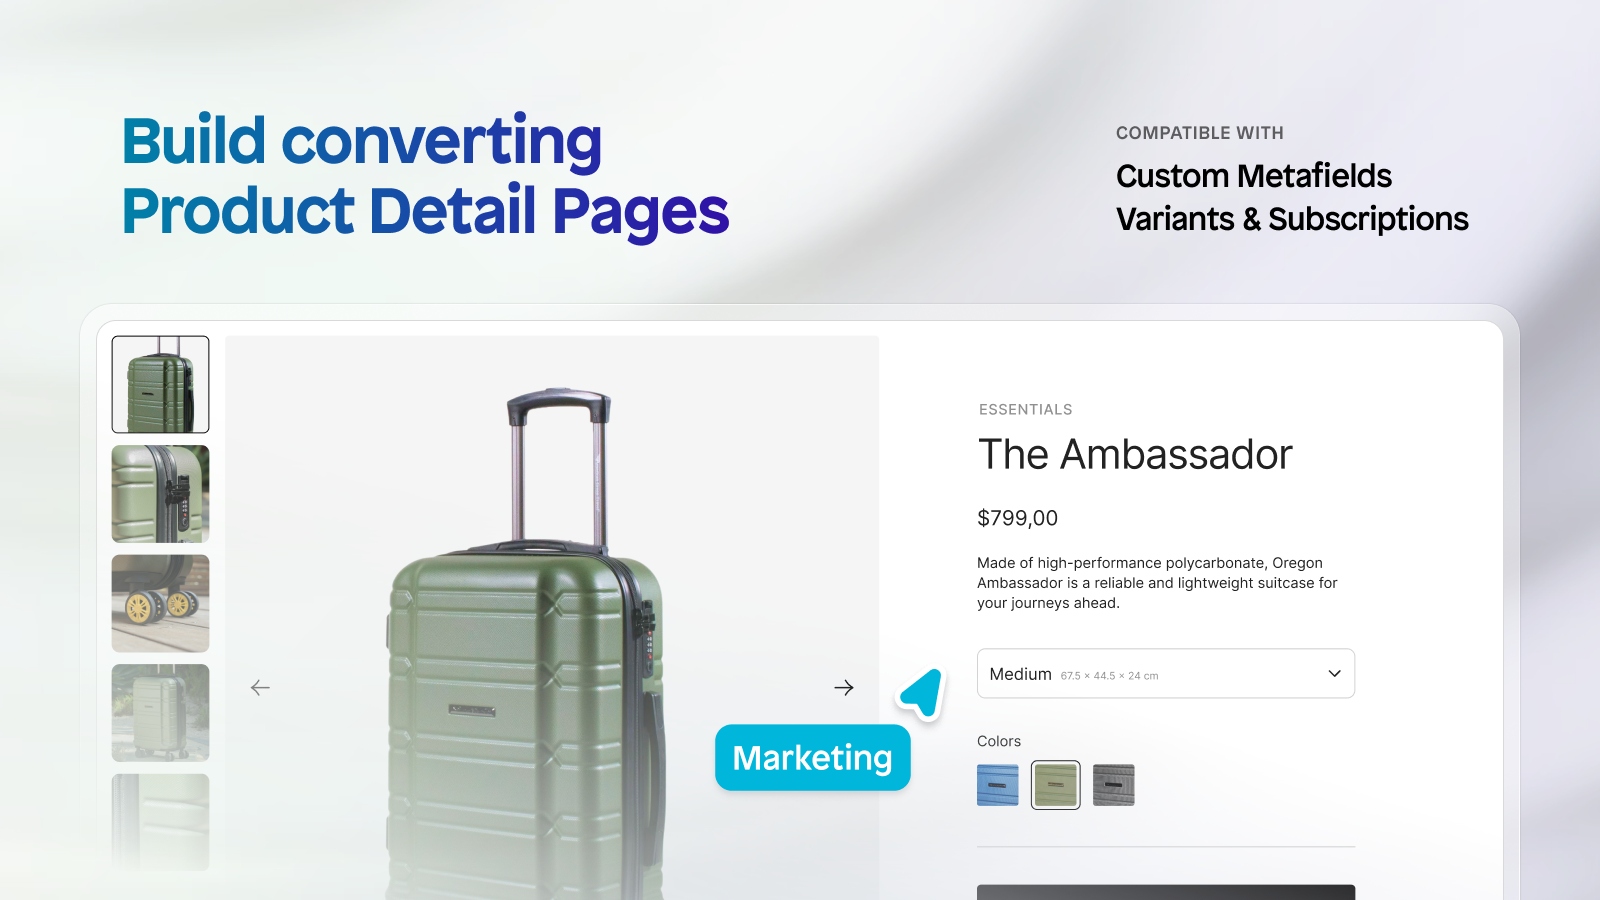 Build converting Product Detail Pages